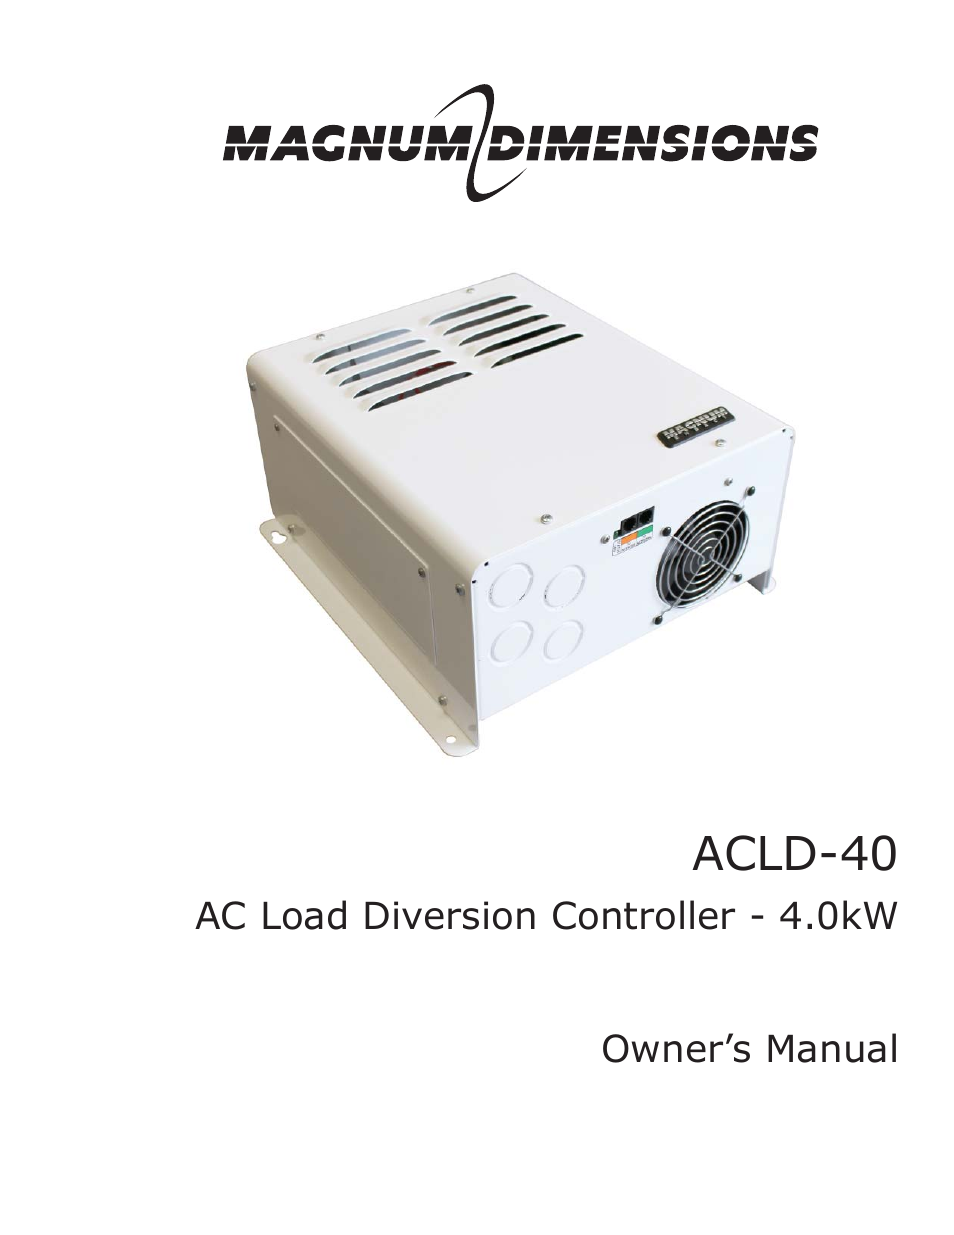 AC Load Diversion Controller (ACLD-40)